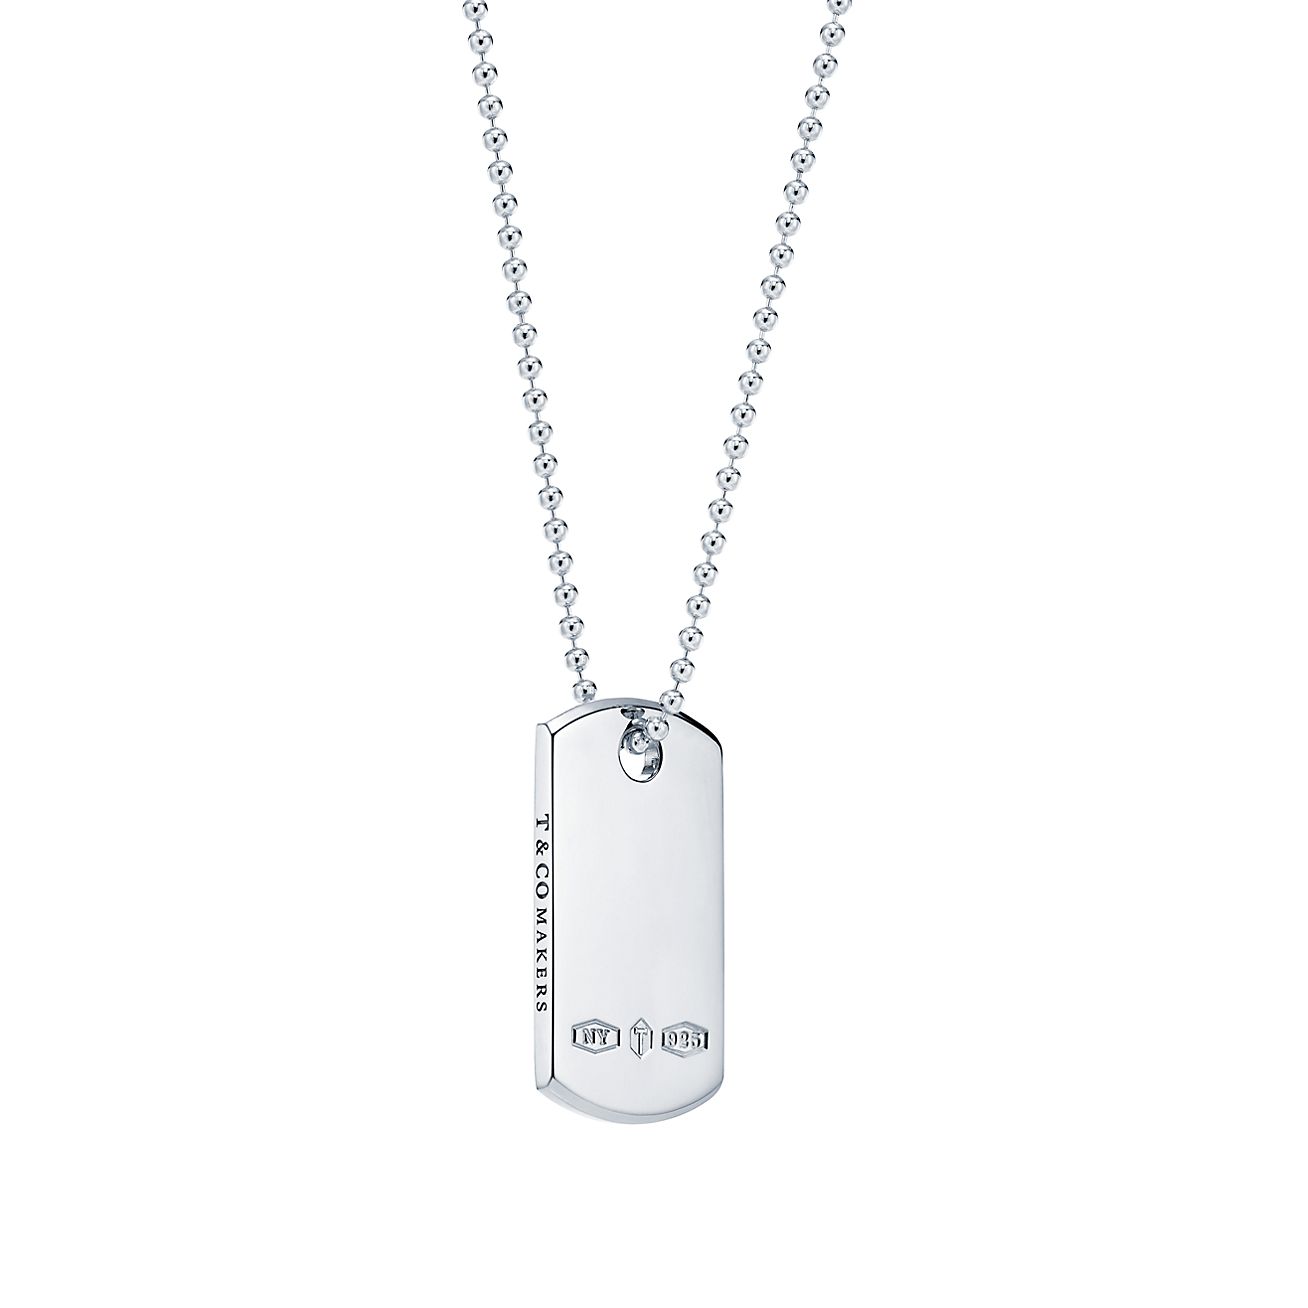 Tiffany 1837® Makers I.D. Tag Pendant in Sterling Silver, 24